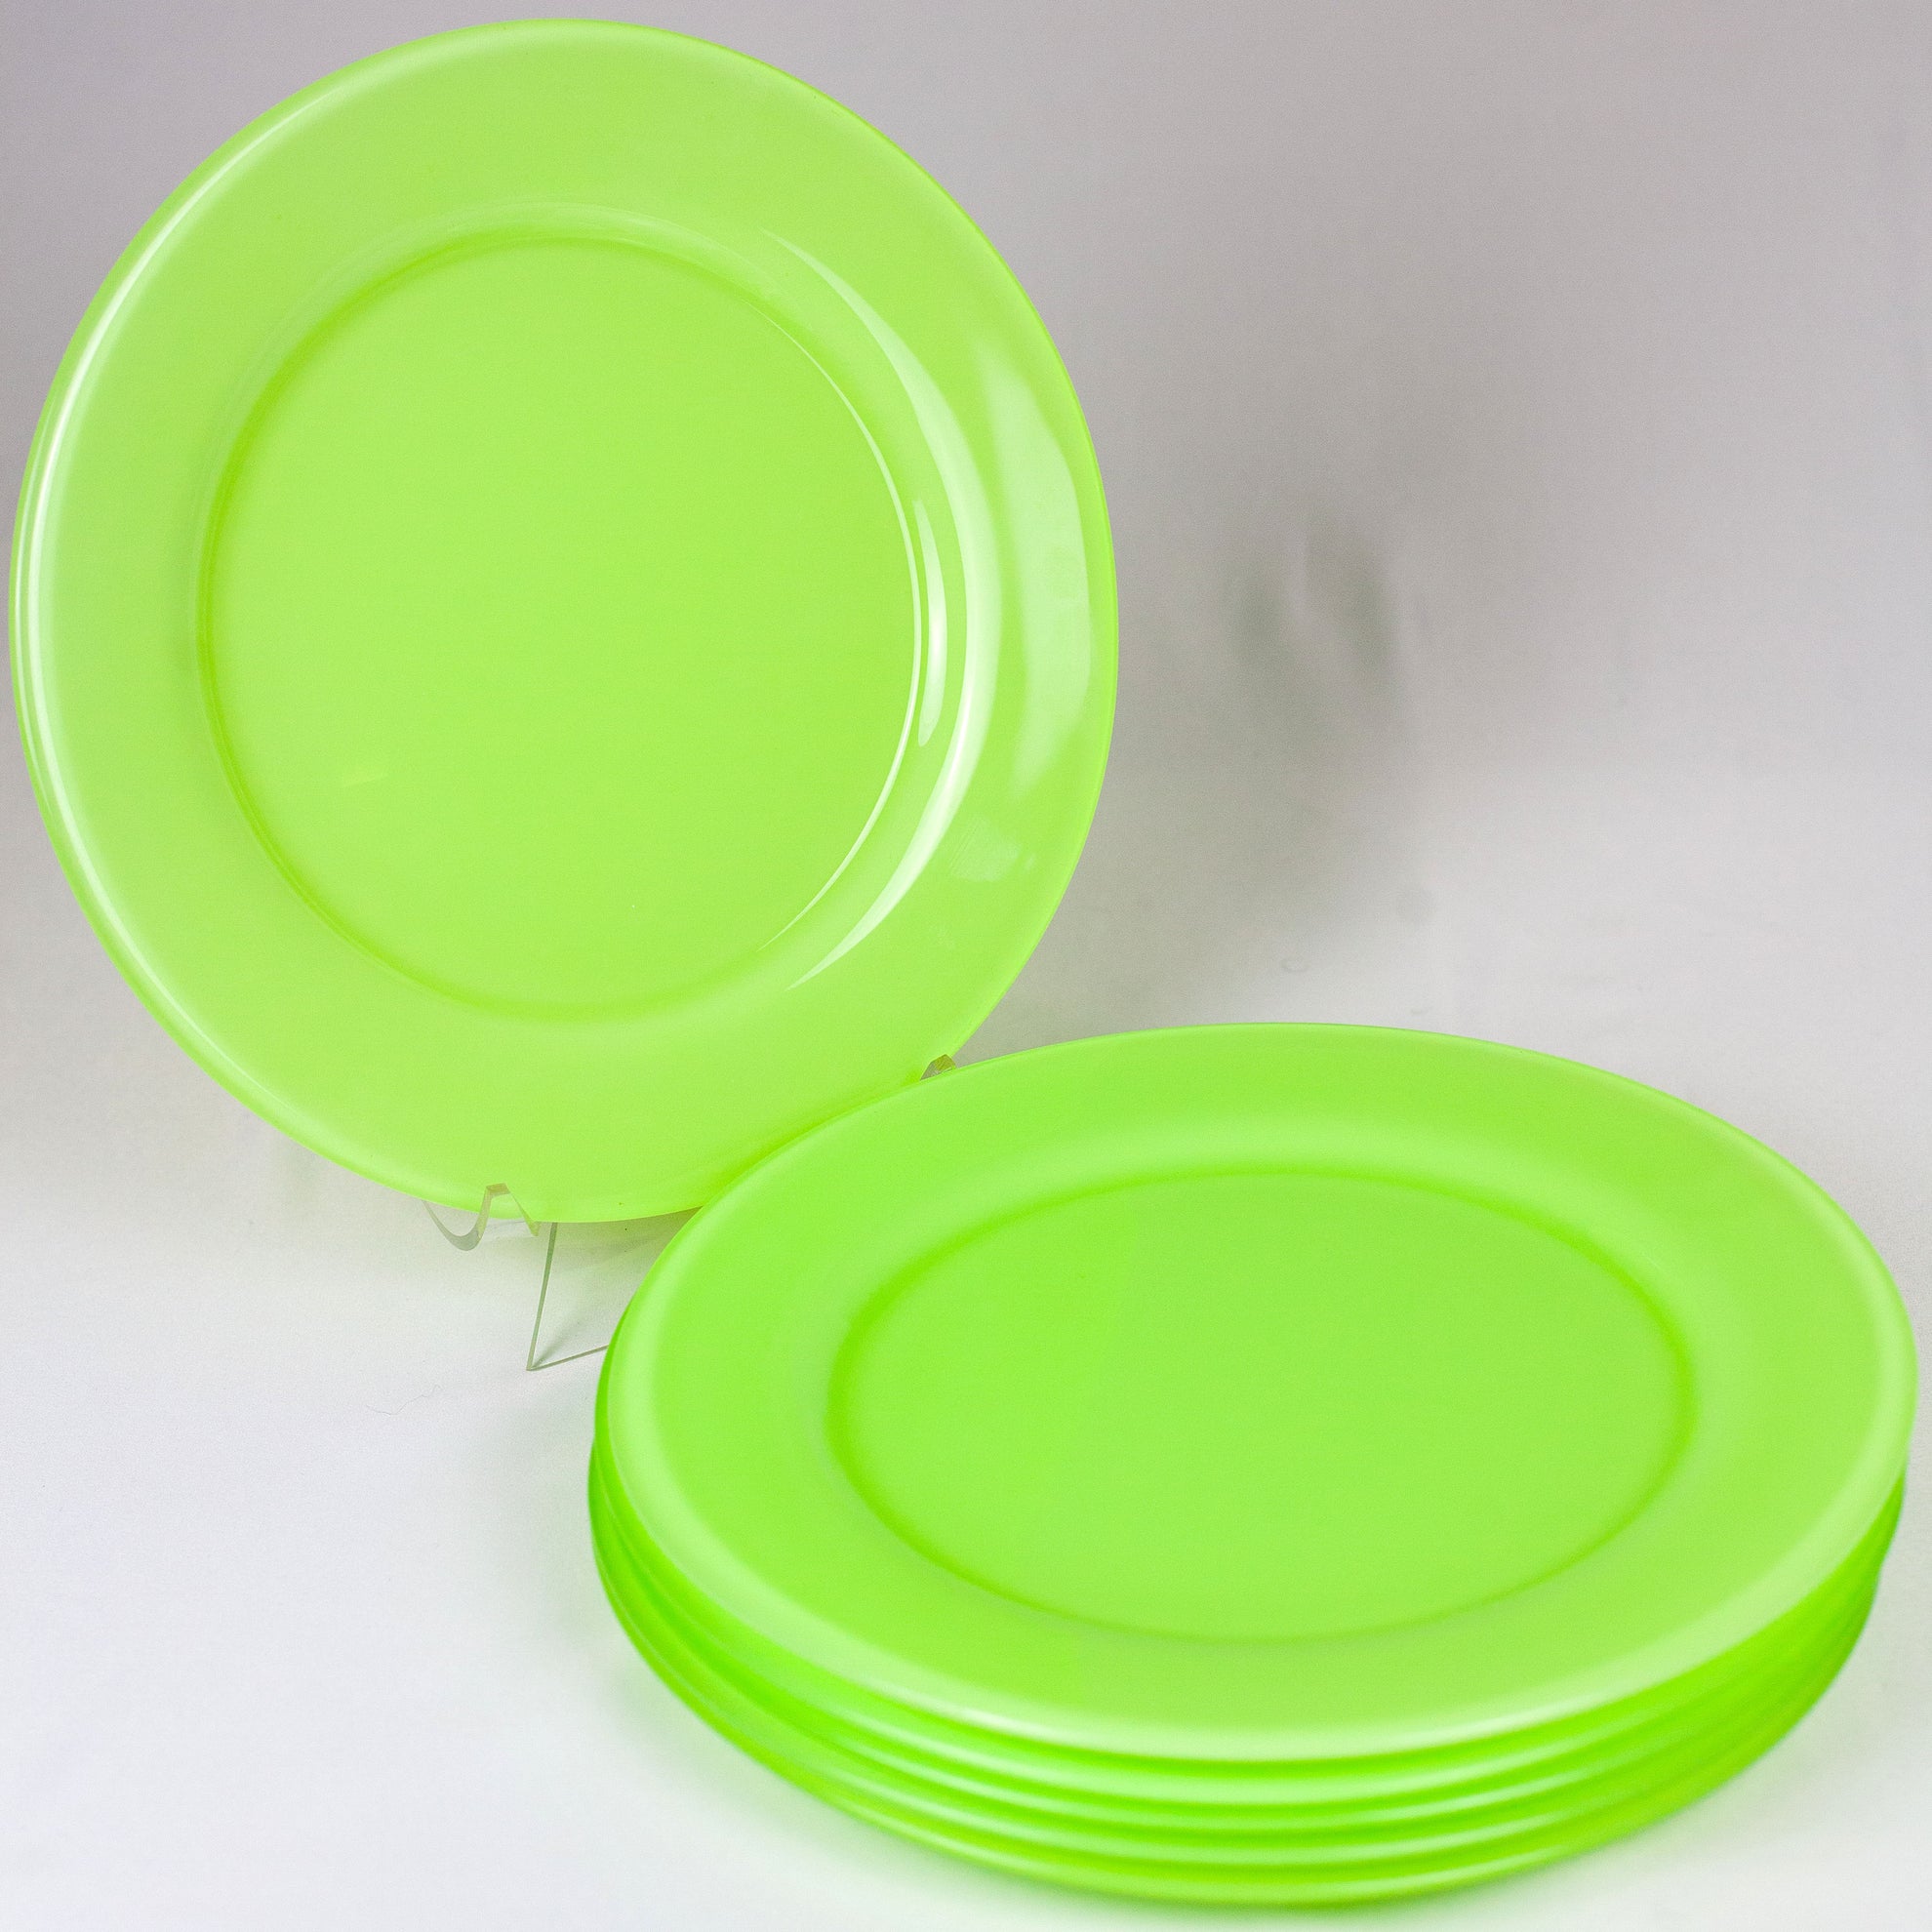 Vintage Green Glass Chargers, Set of 6